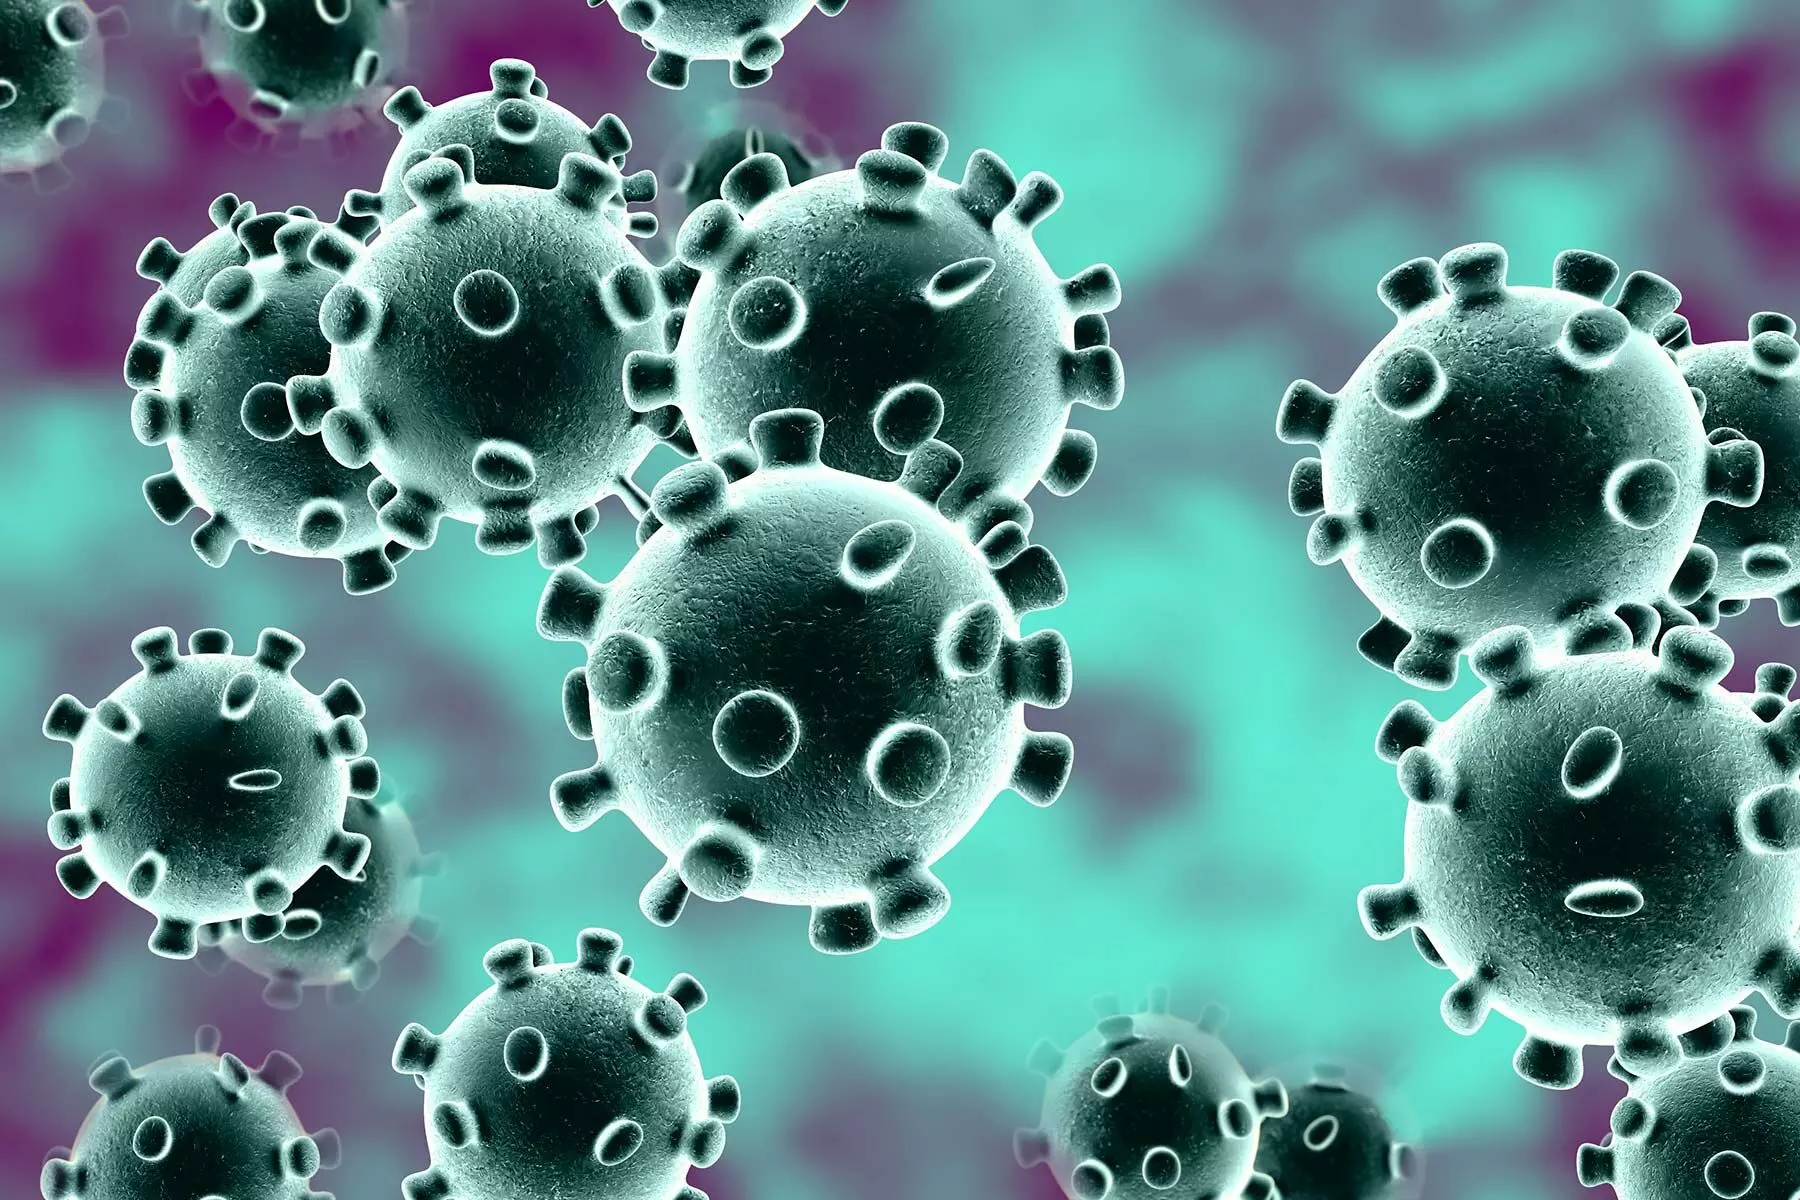 Outbreaks of small infections pose risk of future pandemics: study